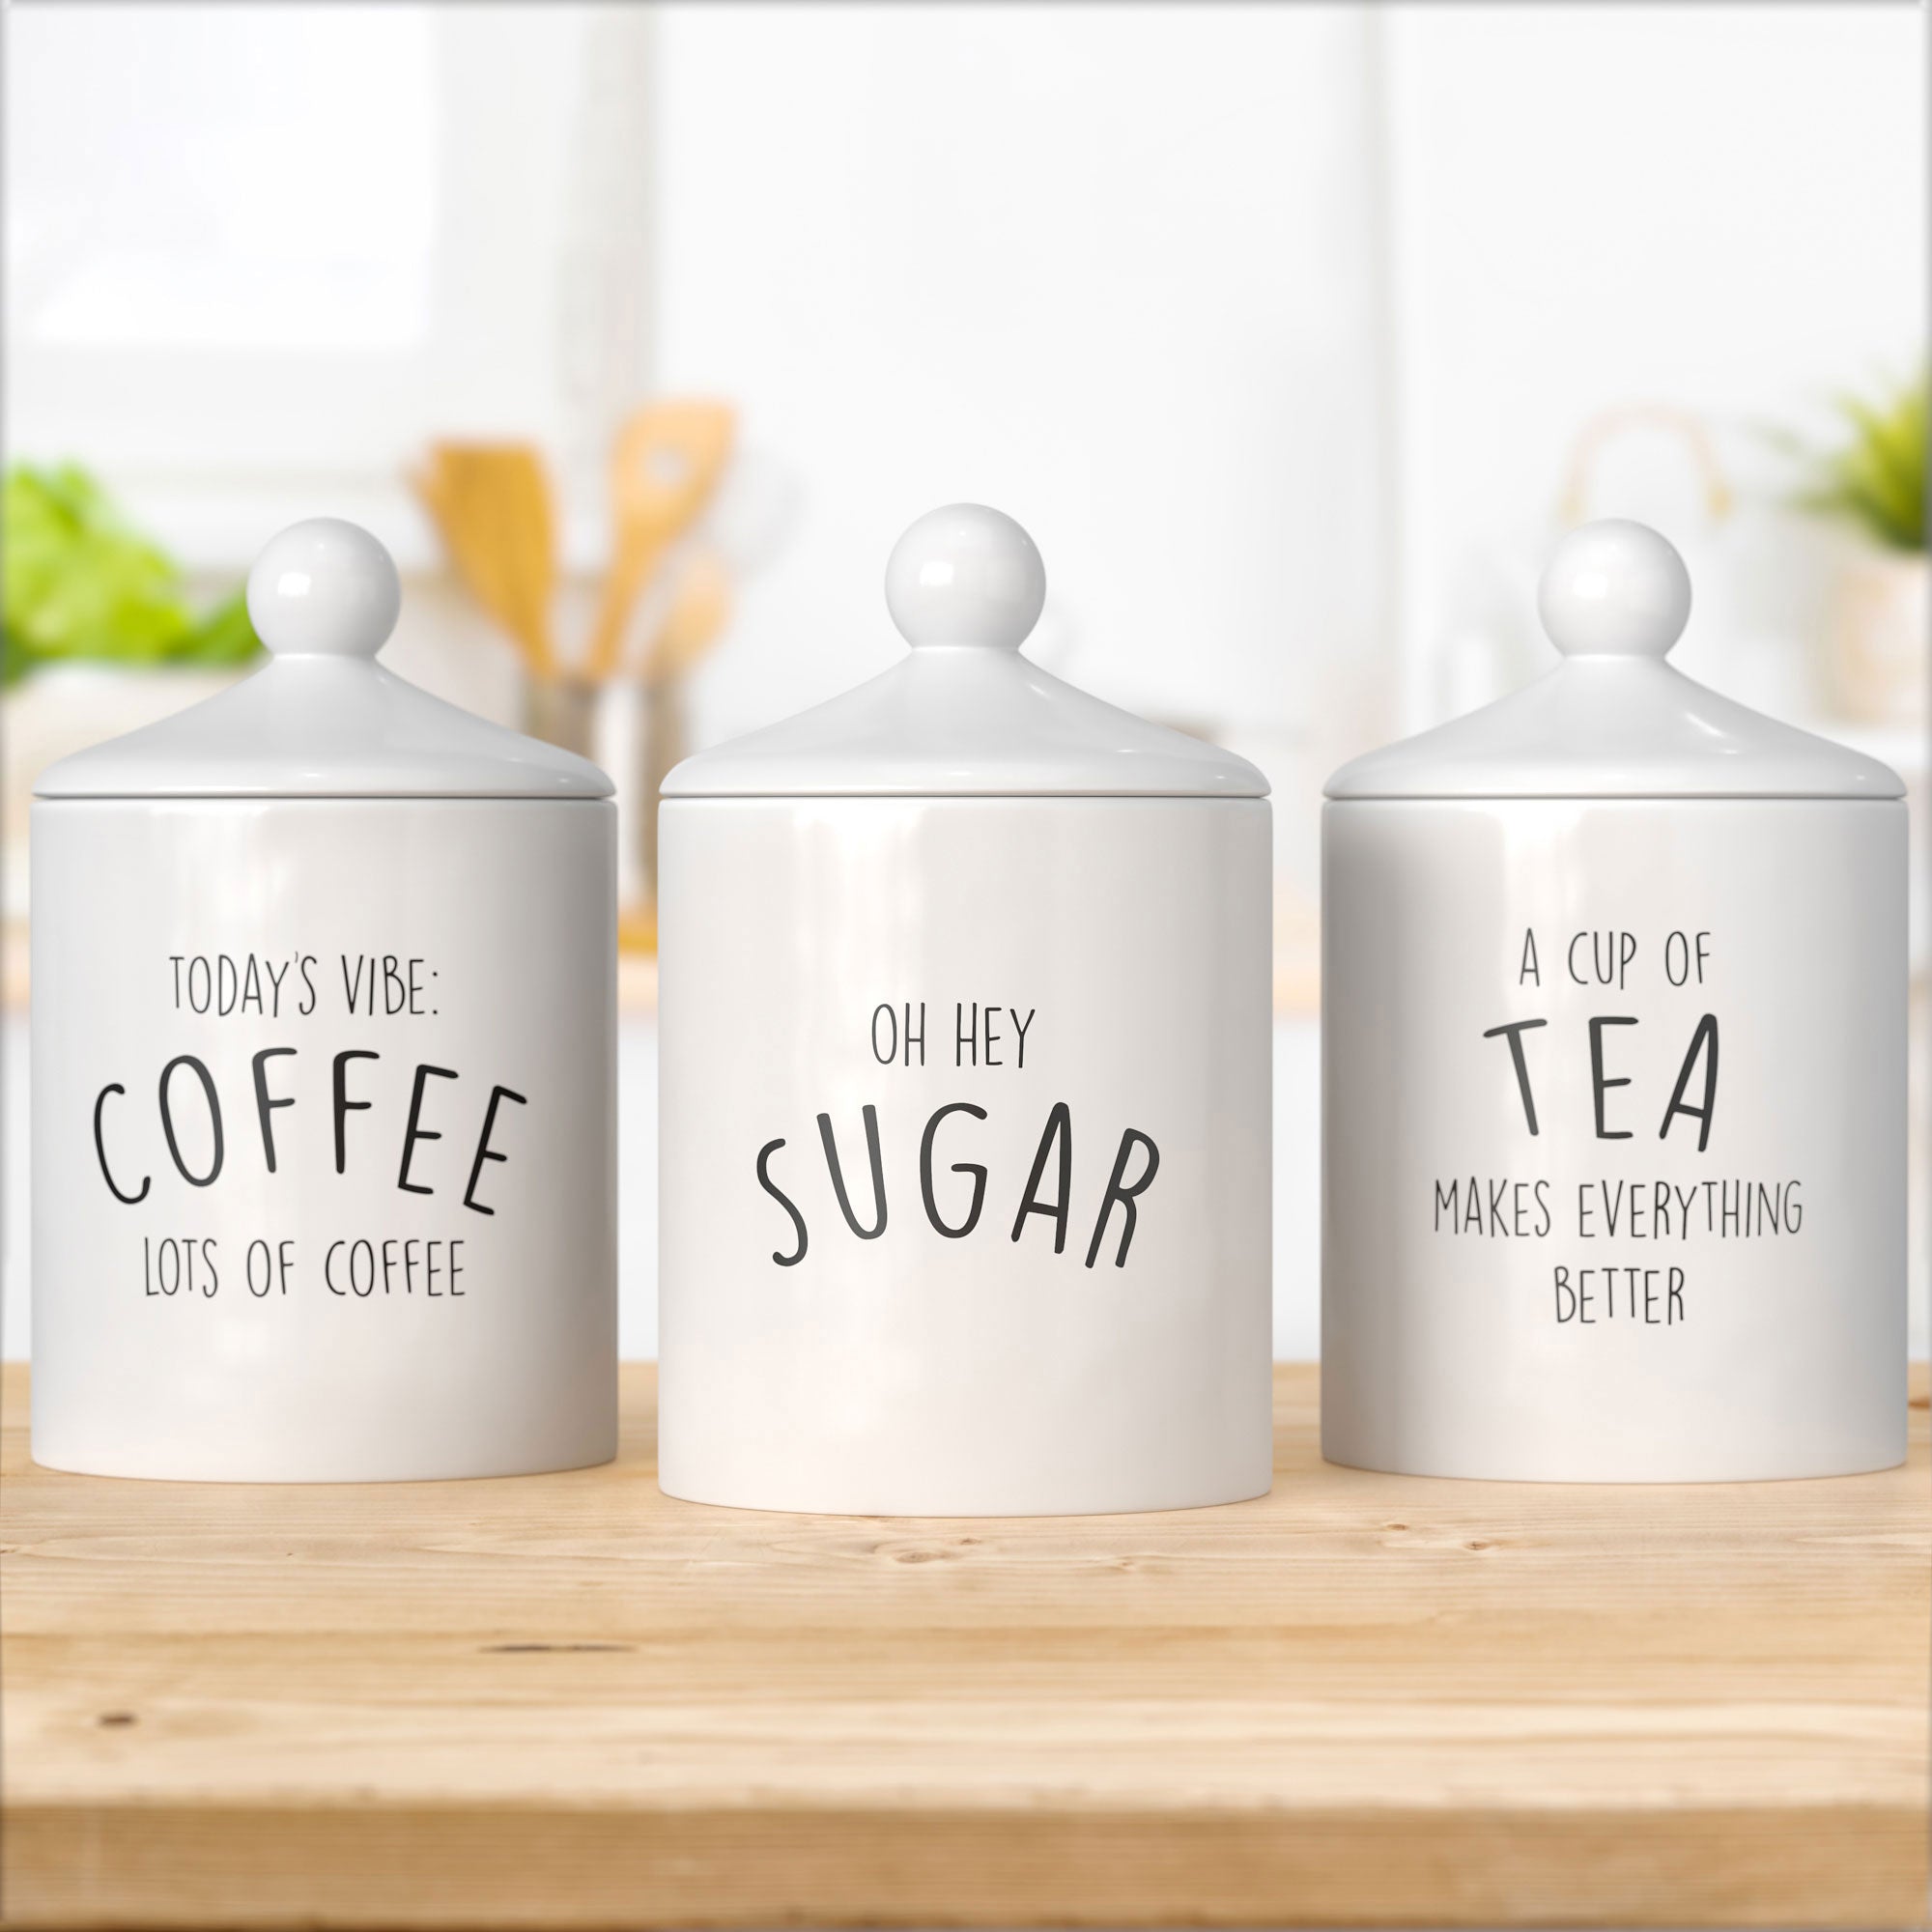 Kitchen Canisters Set of 3, Airtight Sugar, Tea & Coffee Containers, Rustic  Farmhouse Food Storage Canister Jars - White